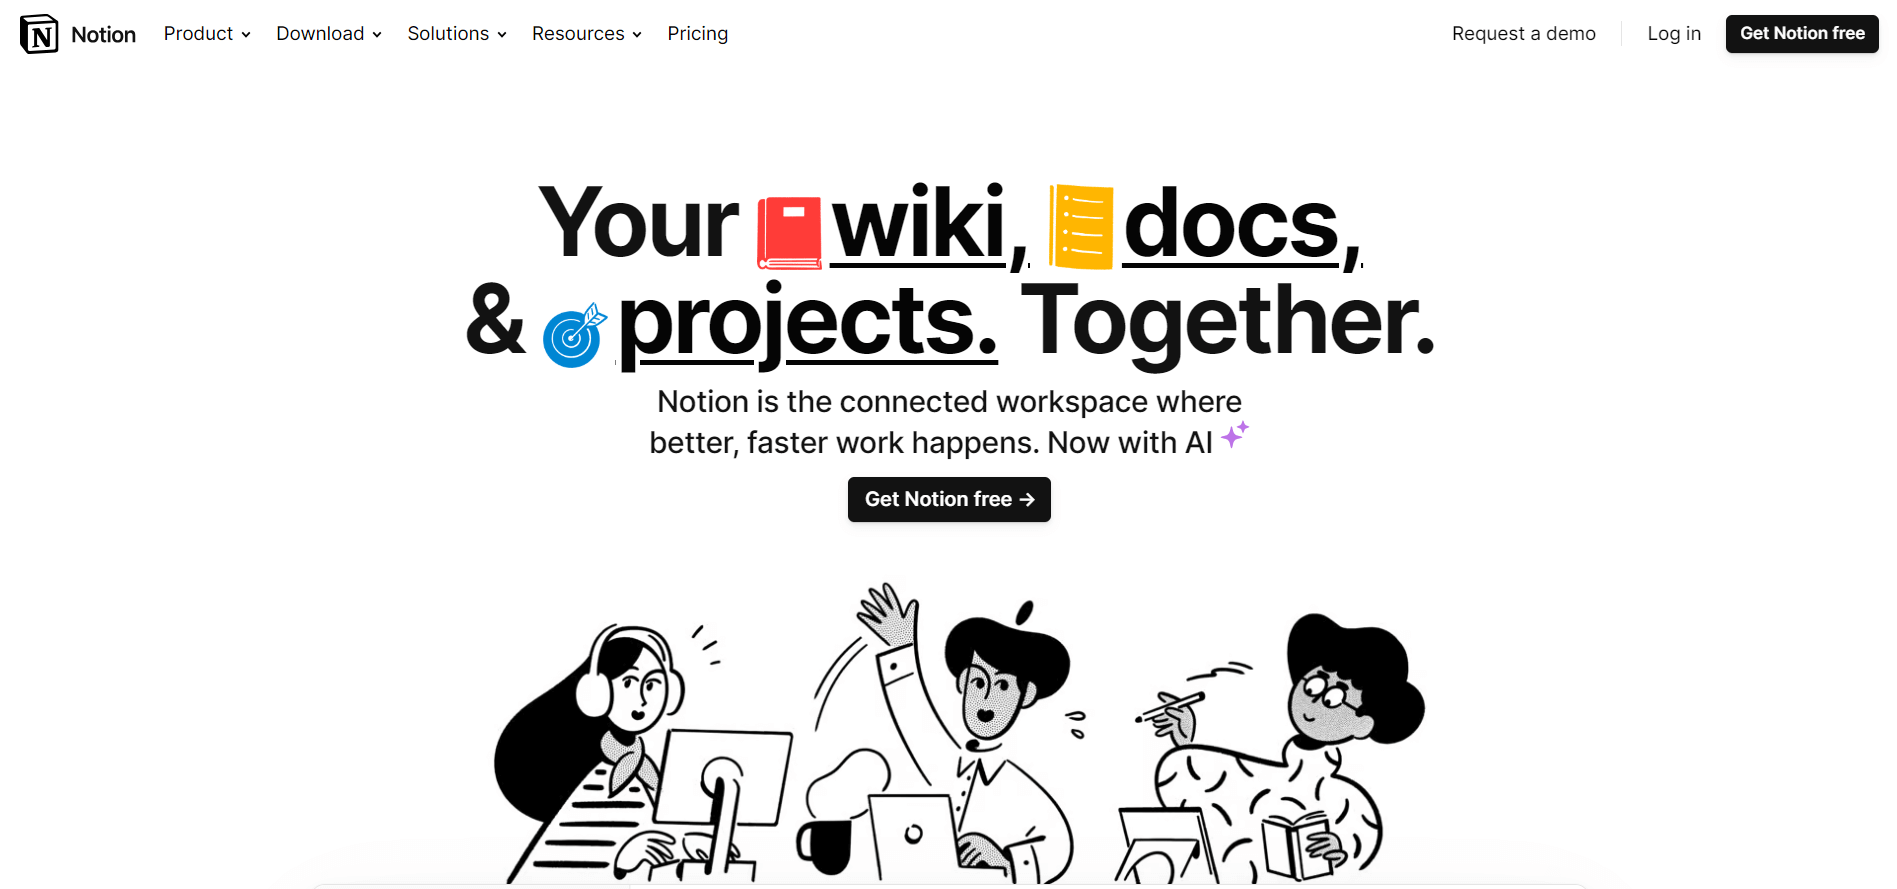 Notion homepage showing a sketchart of three people working with the motto "Your wiki, docs, and projects. Together".